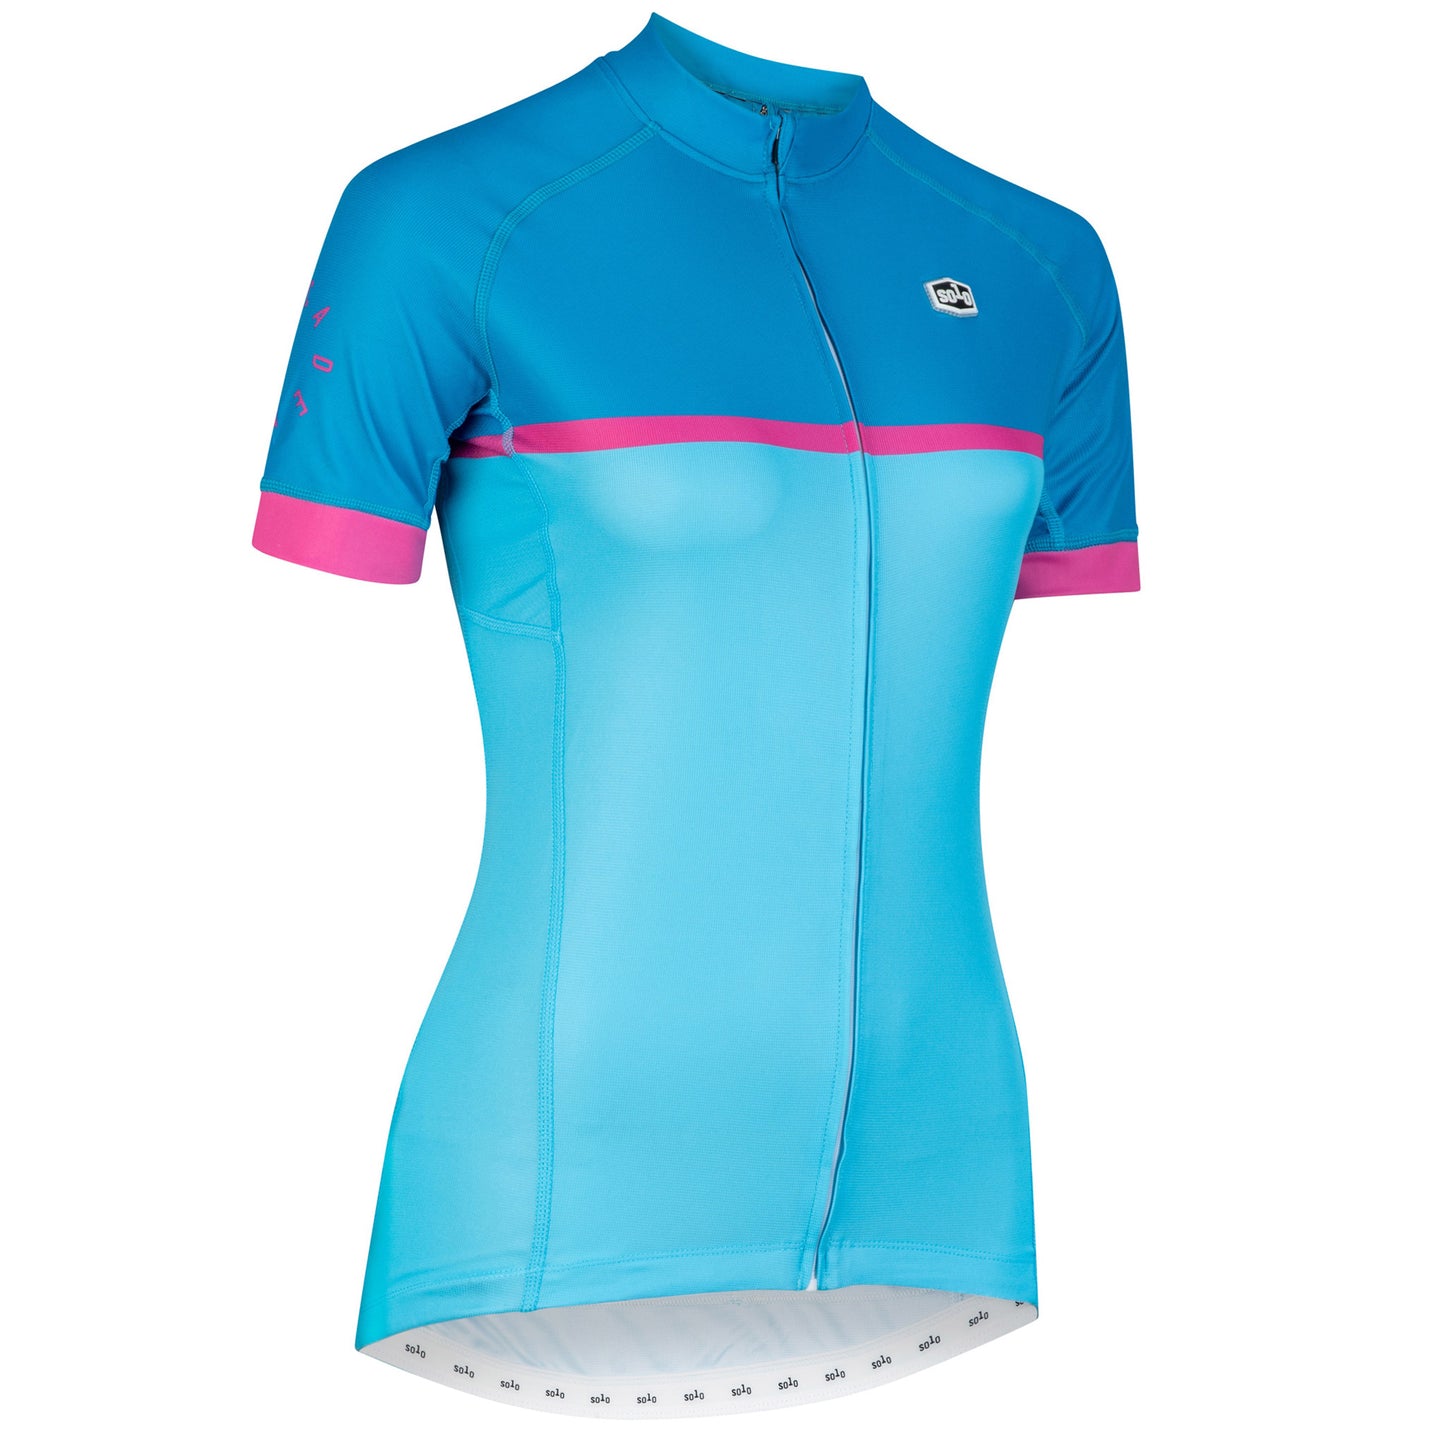 Solo Women's Cadence Jersey, Blue/Pink, buy at Woolys Wheels with free delivery